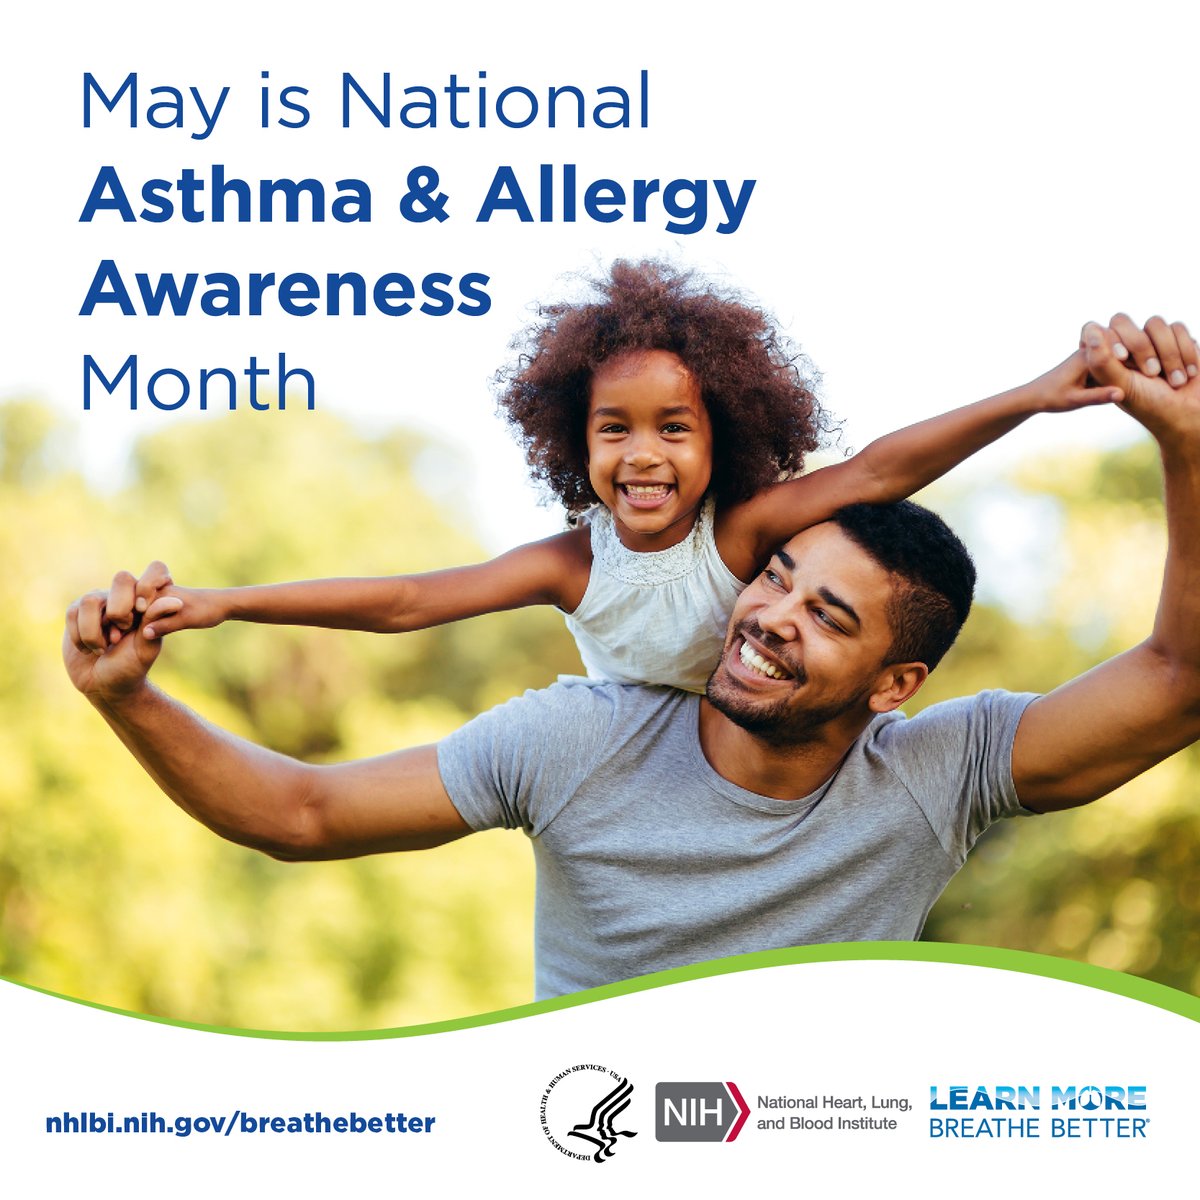 Community Health Workers can have a life-changing impact for families of children living with uncontrolled asthma by providing asthma education & environmental remediation via home visits. Learn more about home visits: ow.ly/JY9n50RK8Fw #AsthmaAwarenessMonth